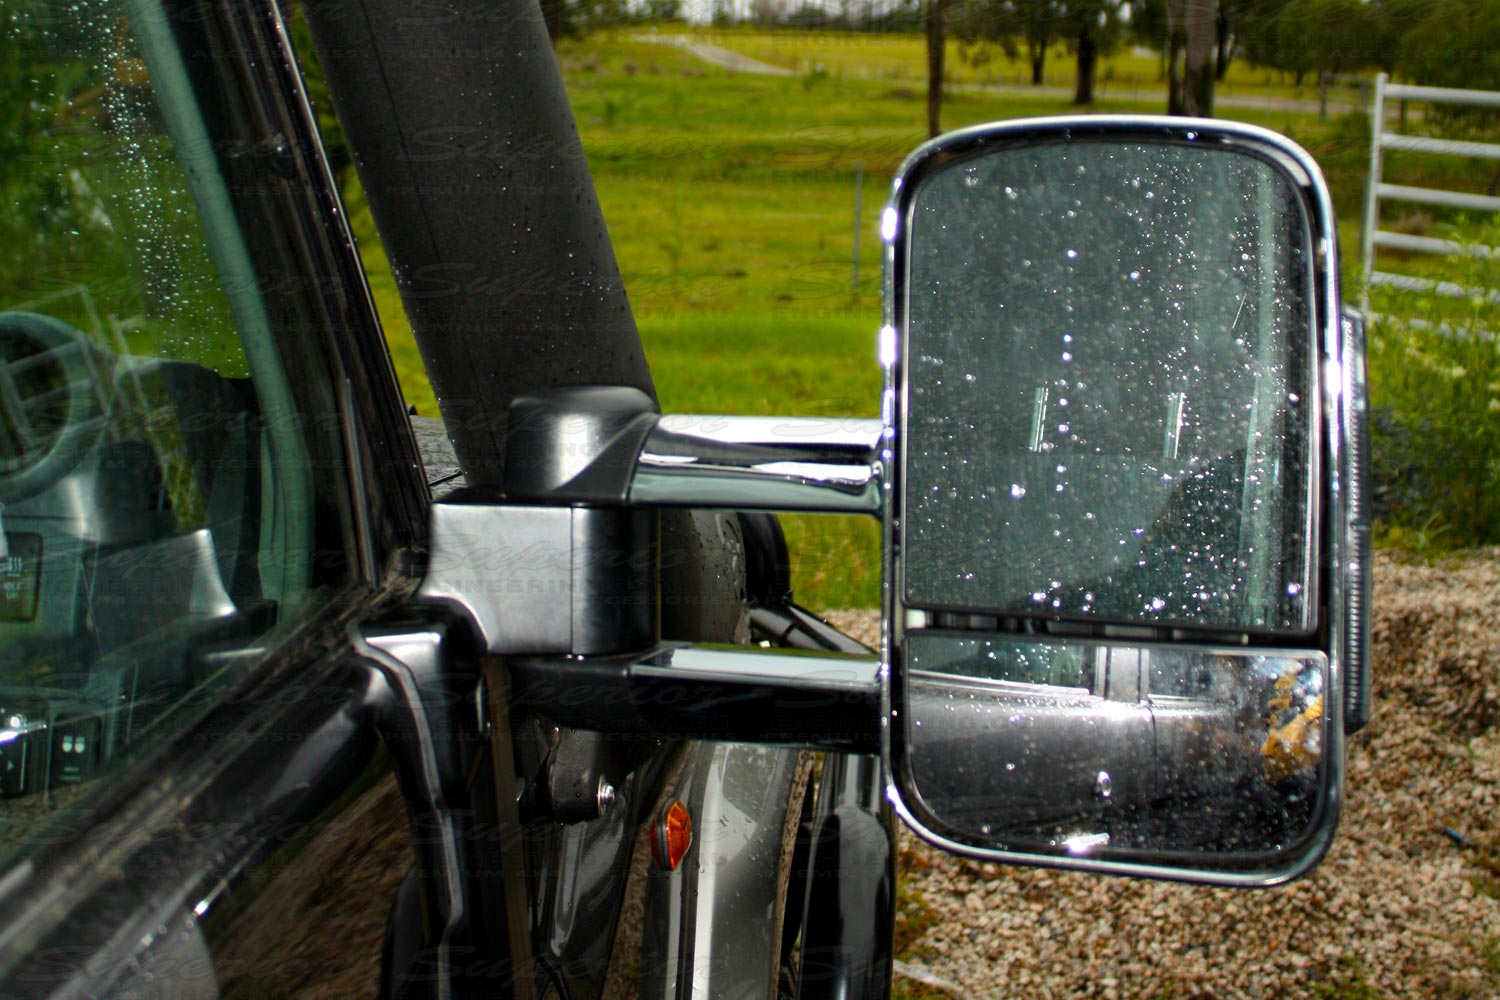 Clearview Towing Mirrors 79 Series Toyota Landcruiser